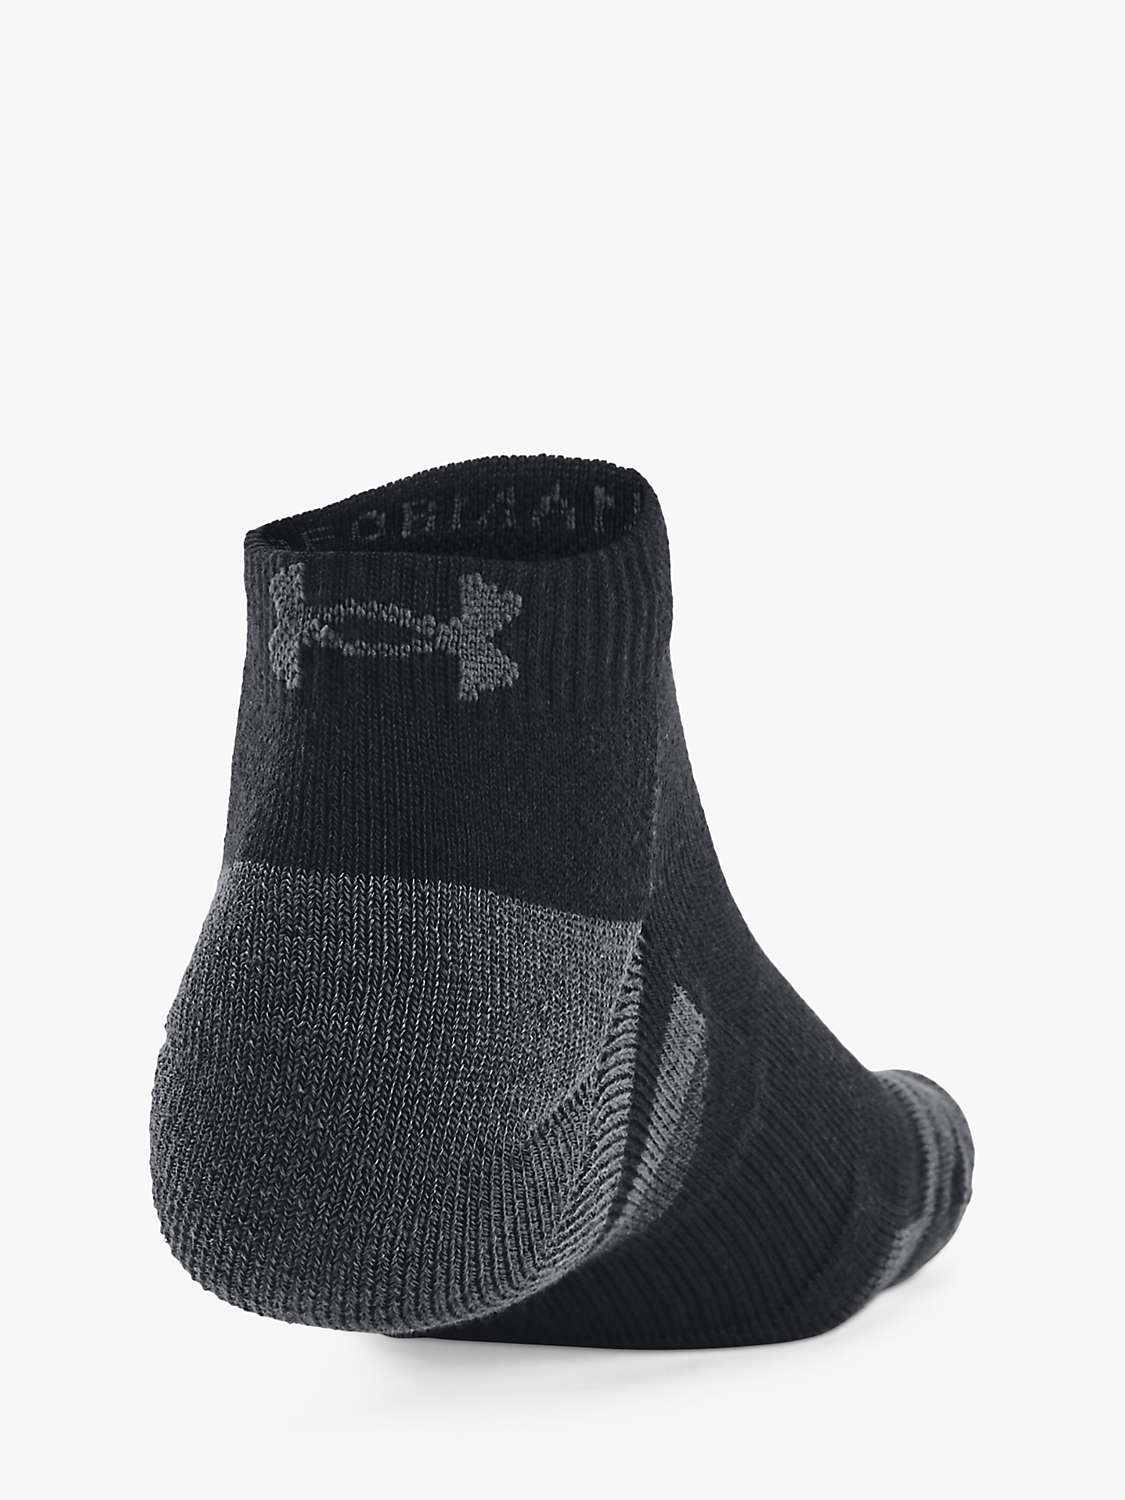 Buy Under Armour Performance Tech Low Cut Socks, Pack of 3, Black/Jet Gray Online at johnlewis.com